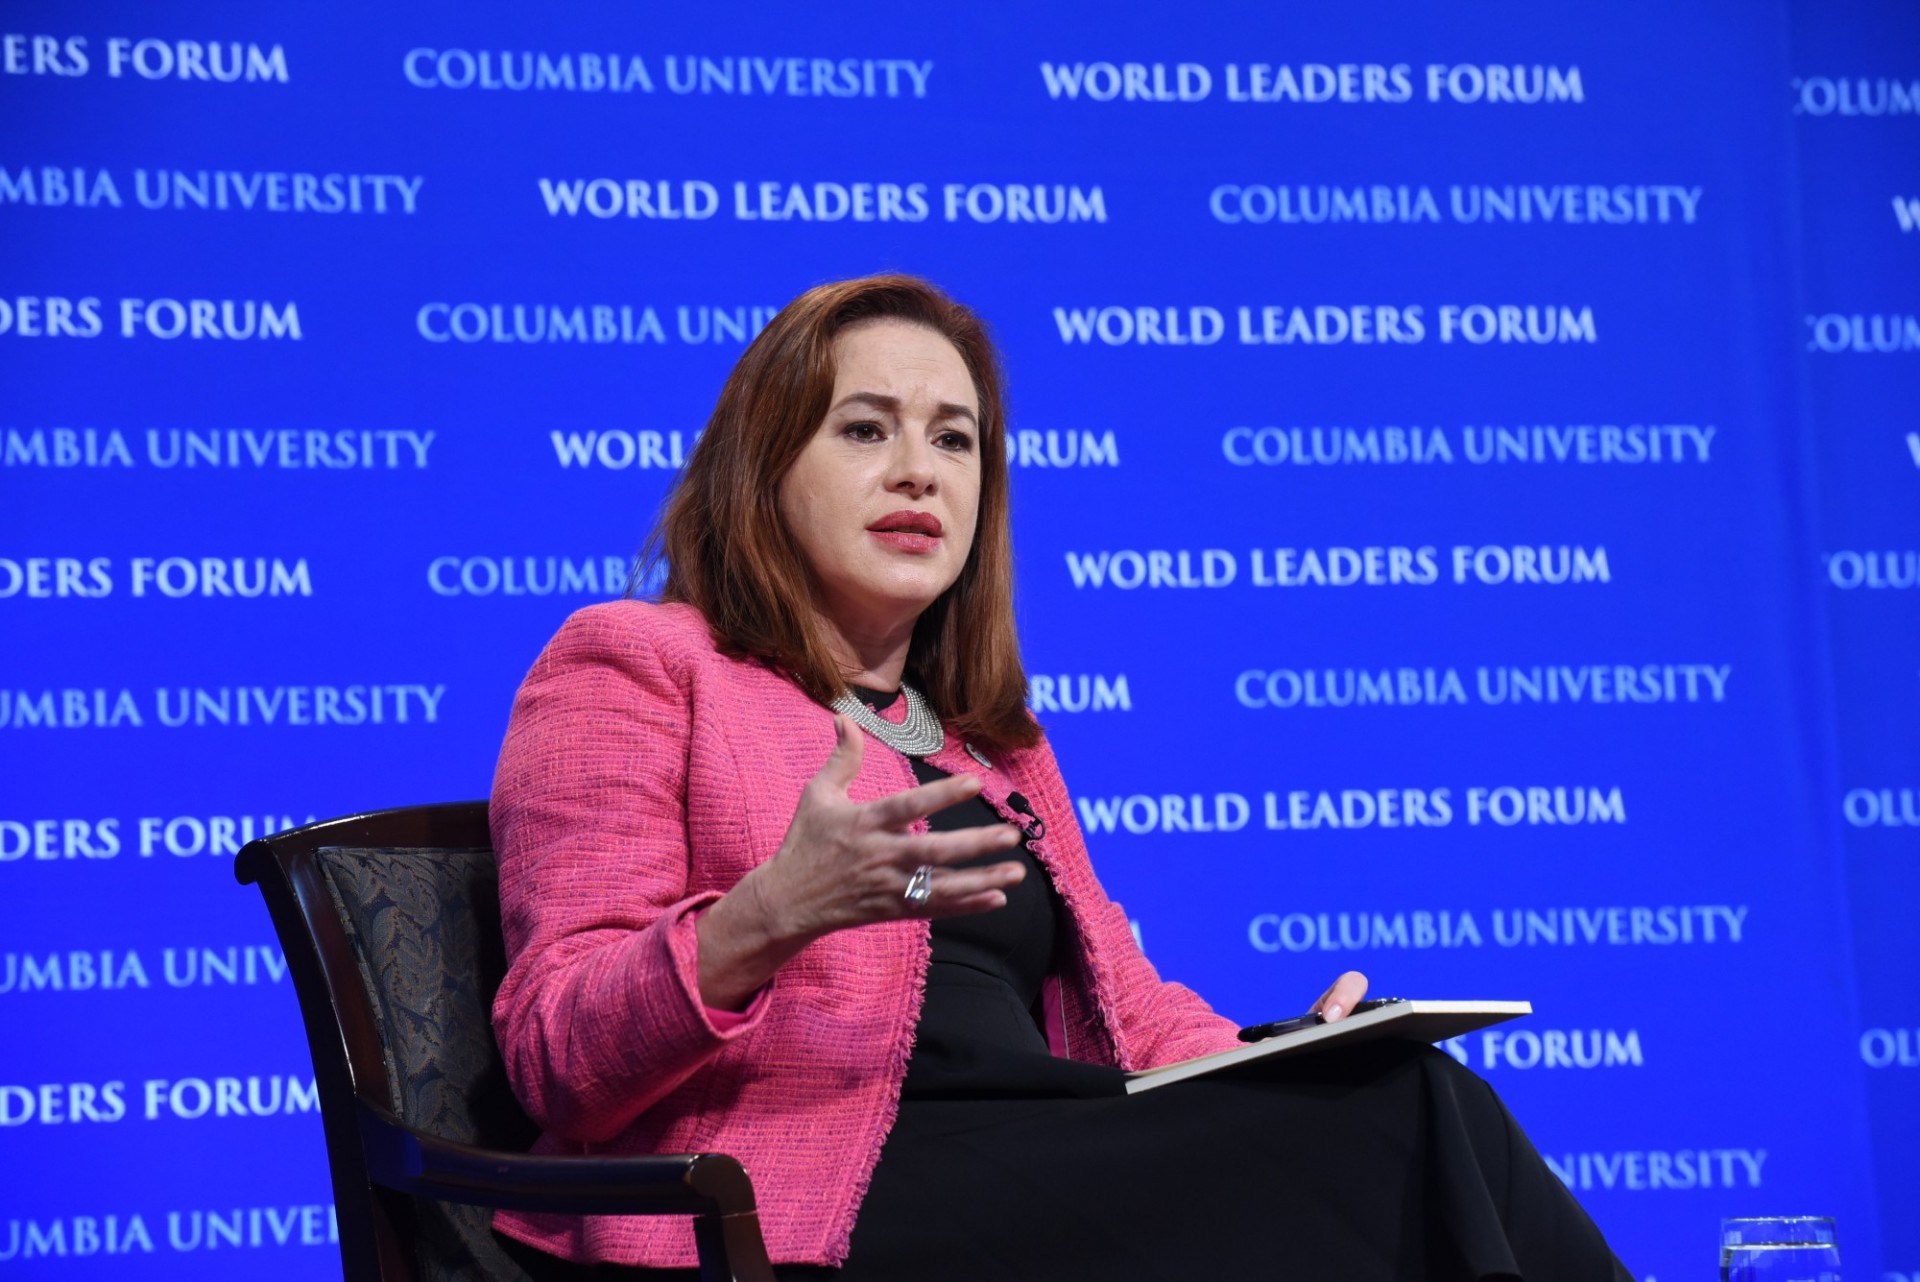 President María Fernanda Espinosa Garcés of the UN General Assembly 73rd Session, delivers her address, “Making the United Nations Relevant for All People,” to Columbia University students, faculty and staff.